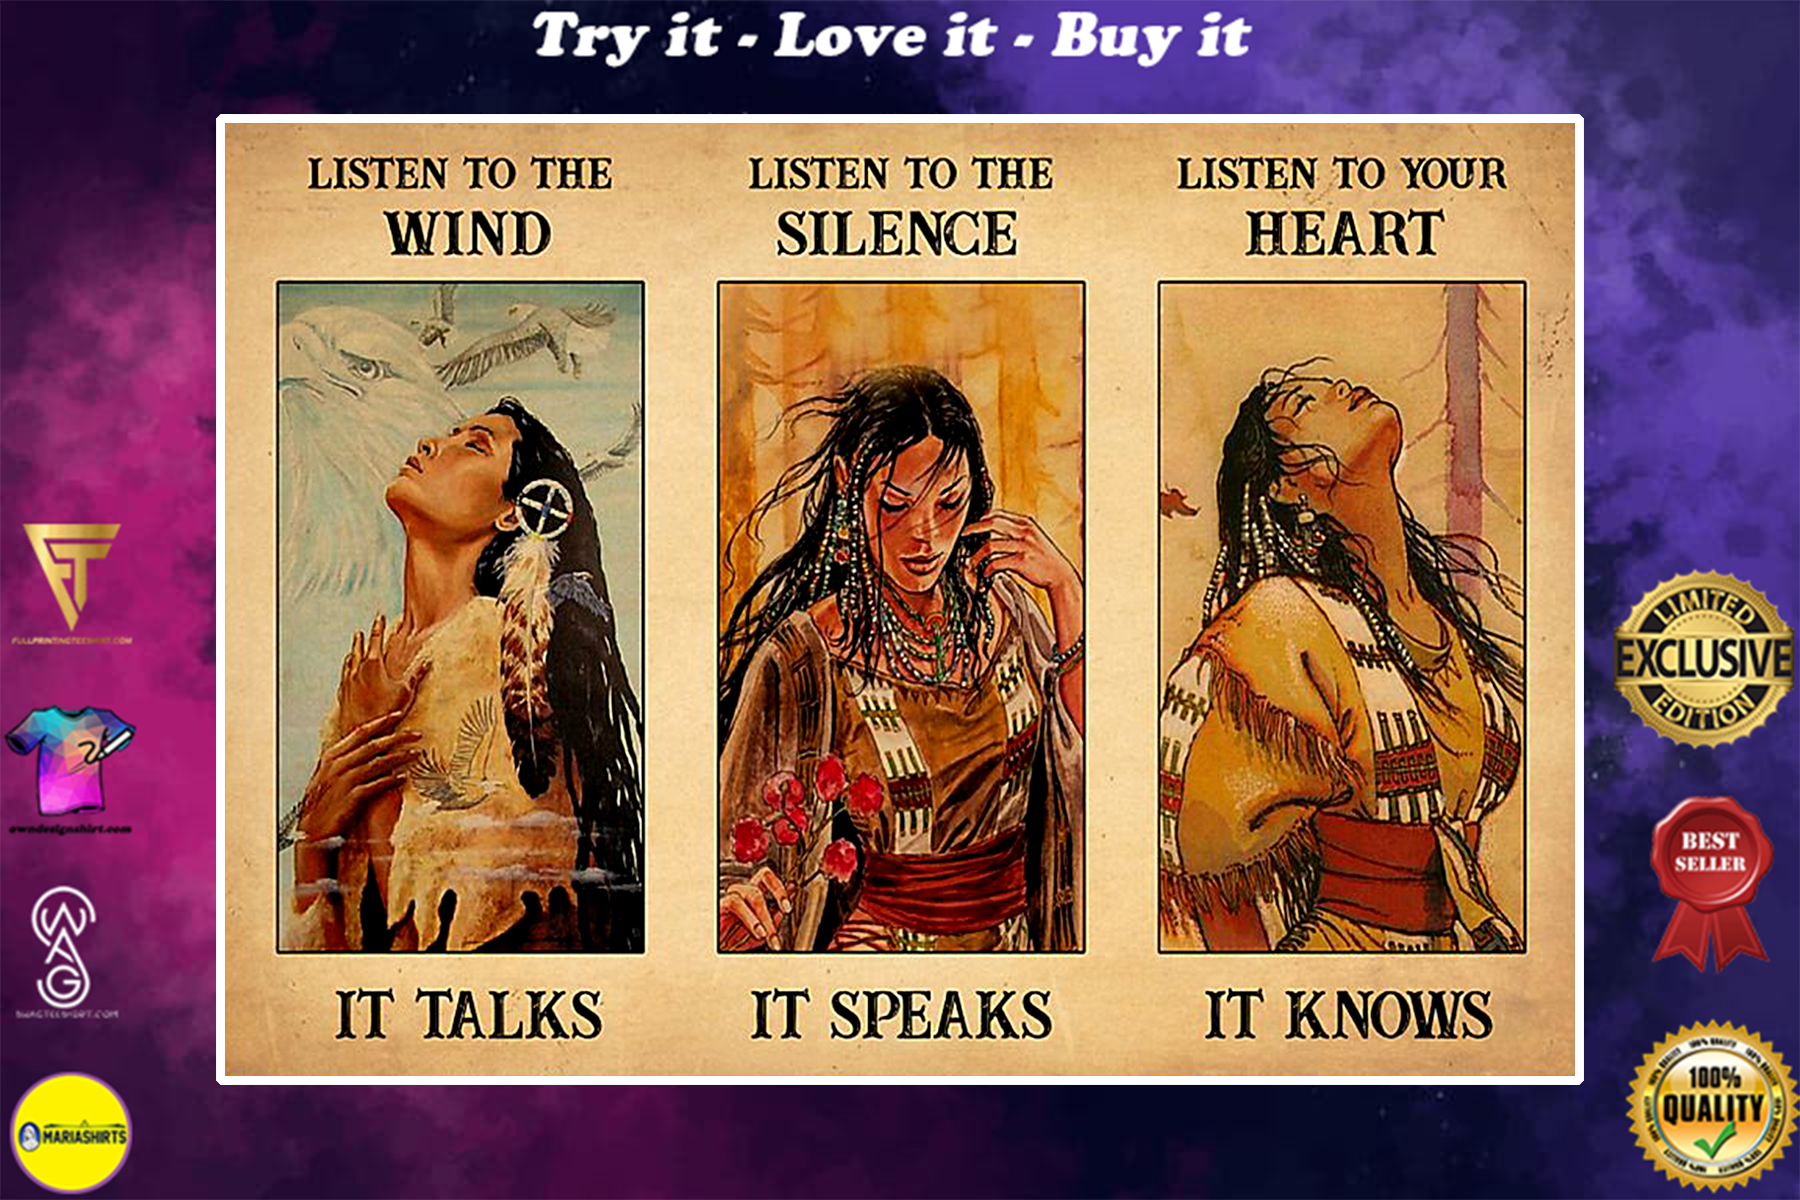 vintage native american girls listen to the wind it talks listen to the silence it speaks poster